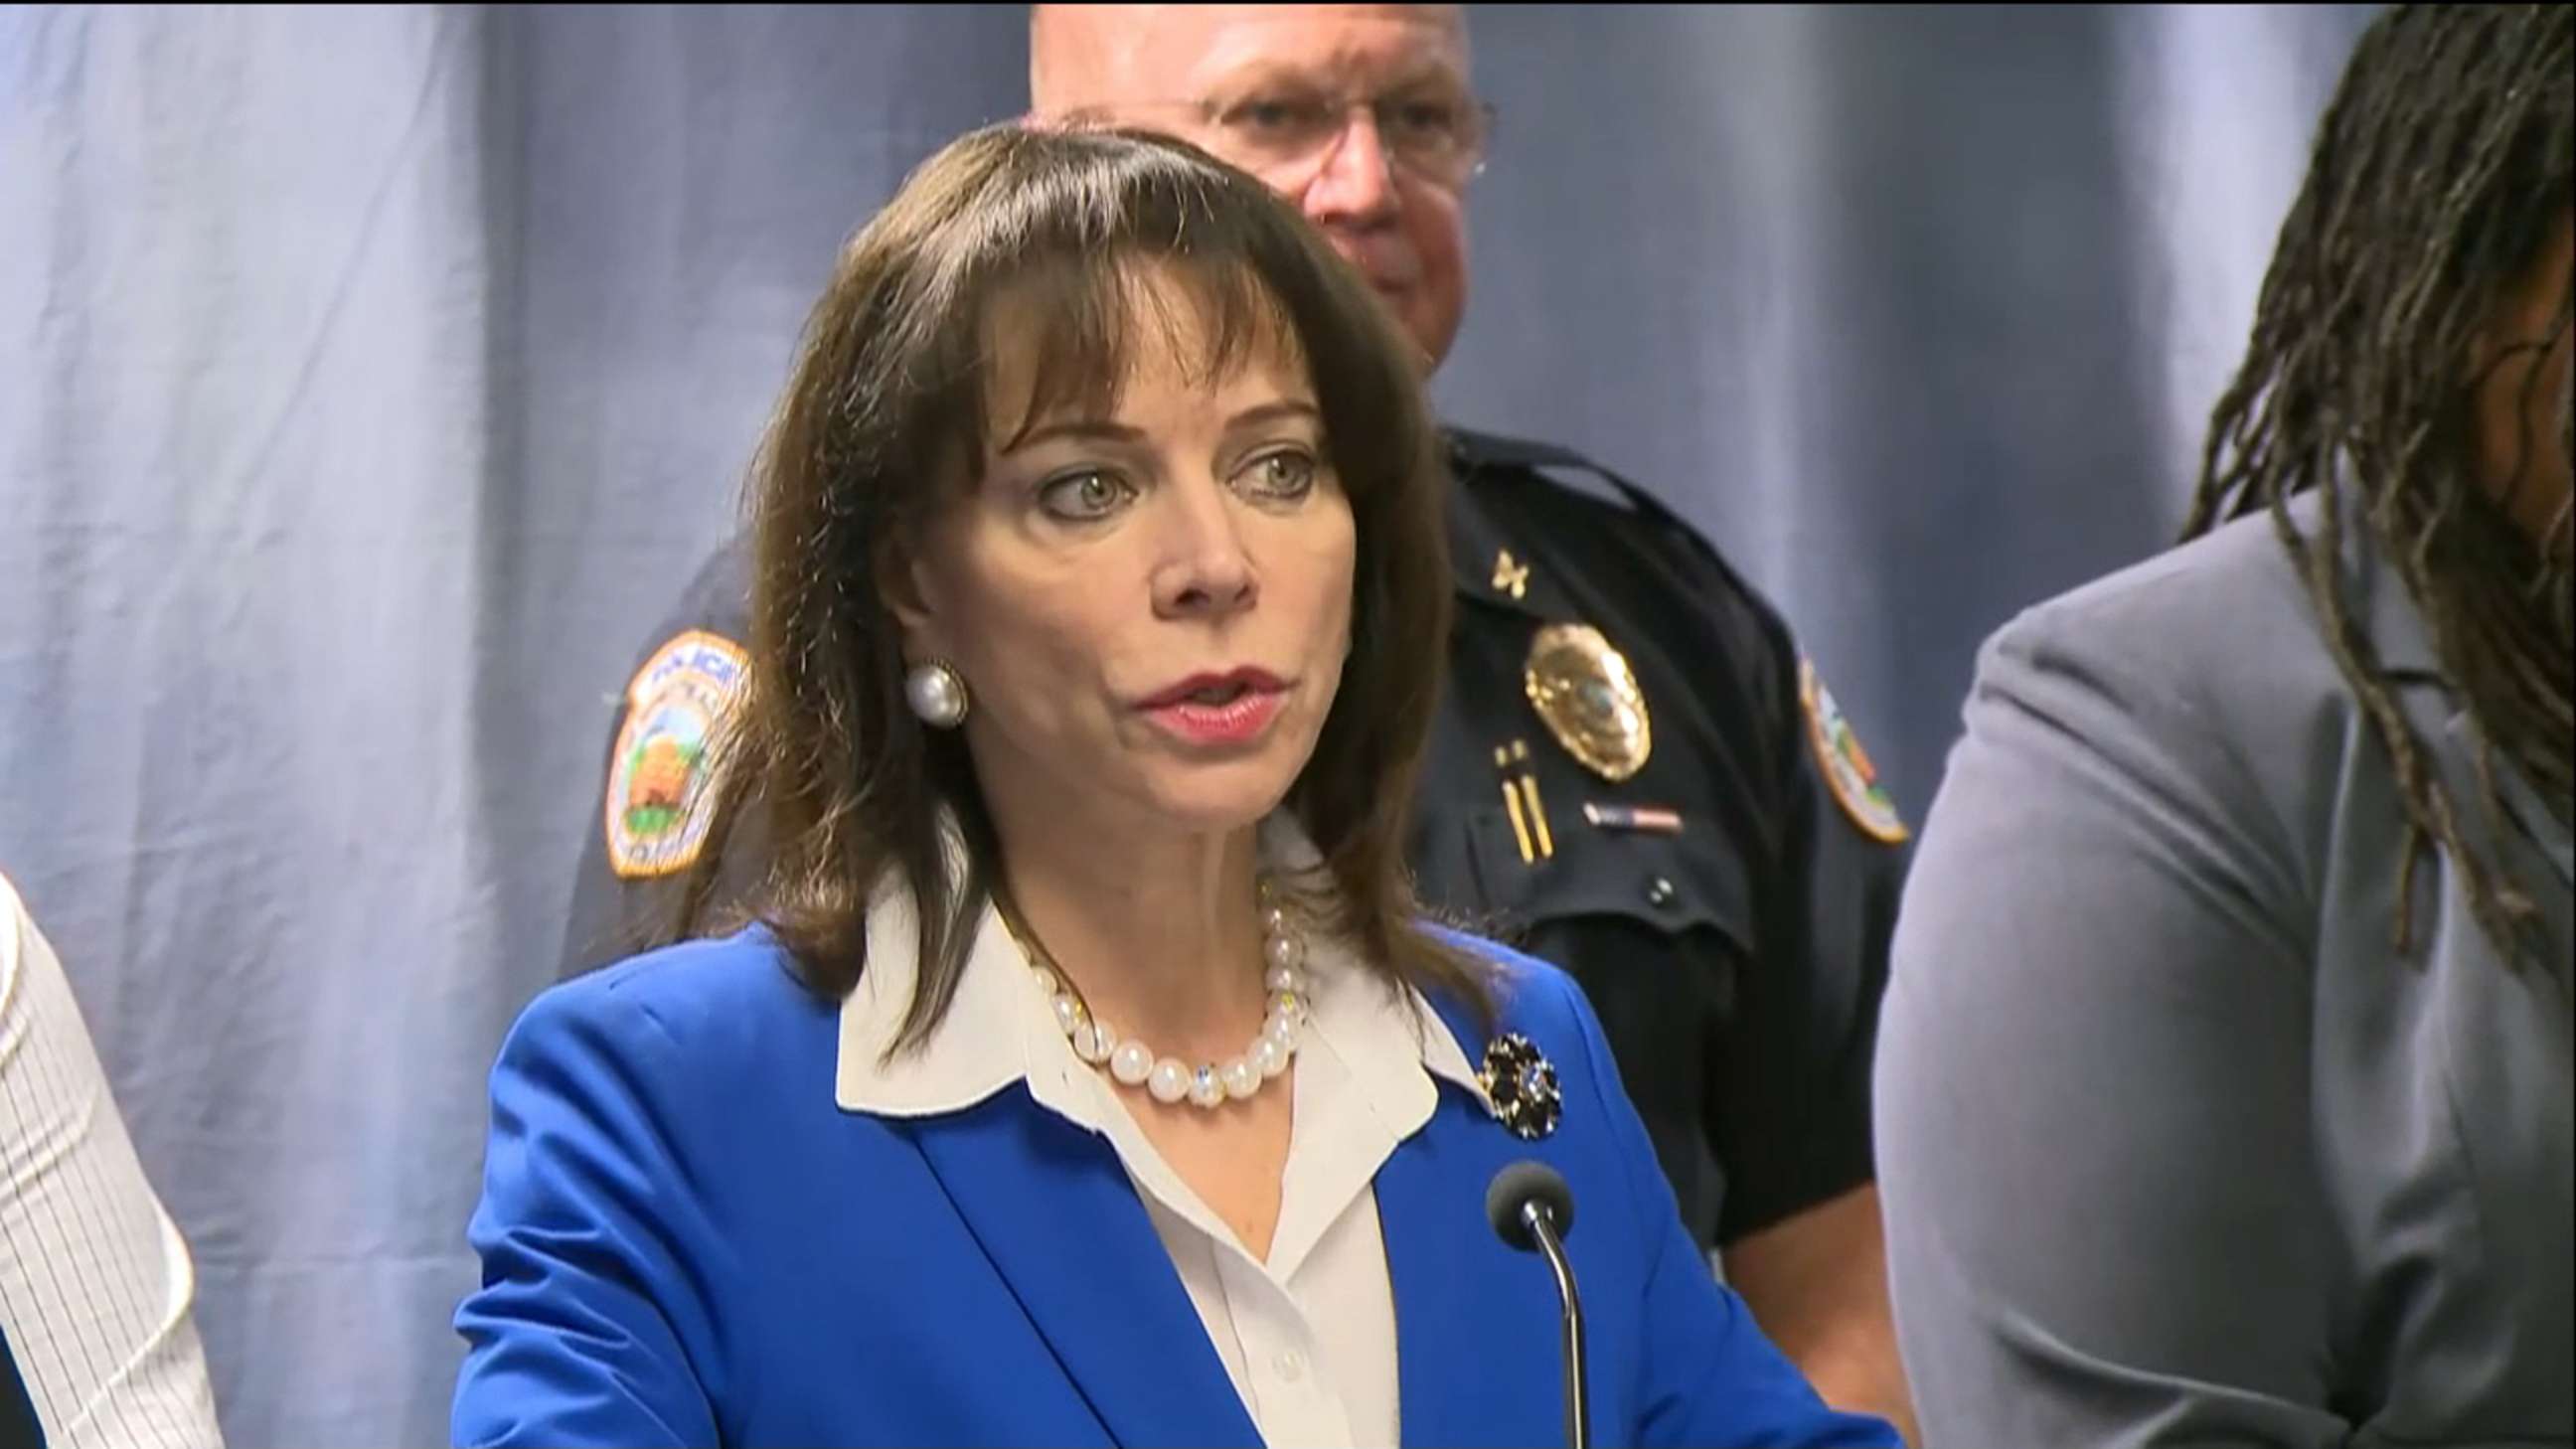 PHOTO: Miami-Dade State Attorney Katherine Fernandez Rundle speaks at a press conference on Aug. 7, 2019, about Homestead Police officer Lester Brown who has been charged with felony battery and official misconduct for pushing an inmate into a wall.